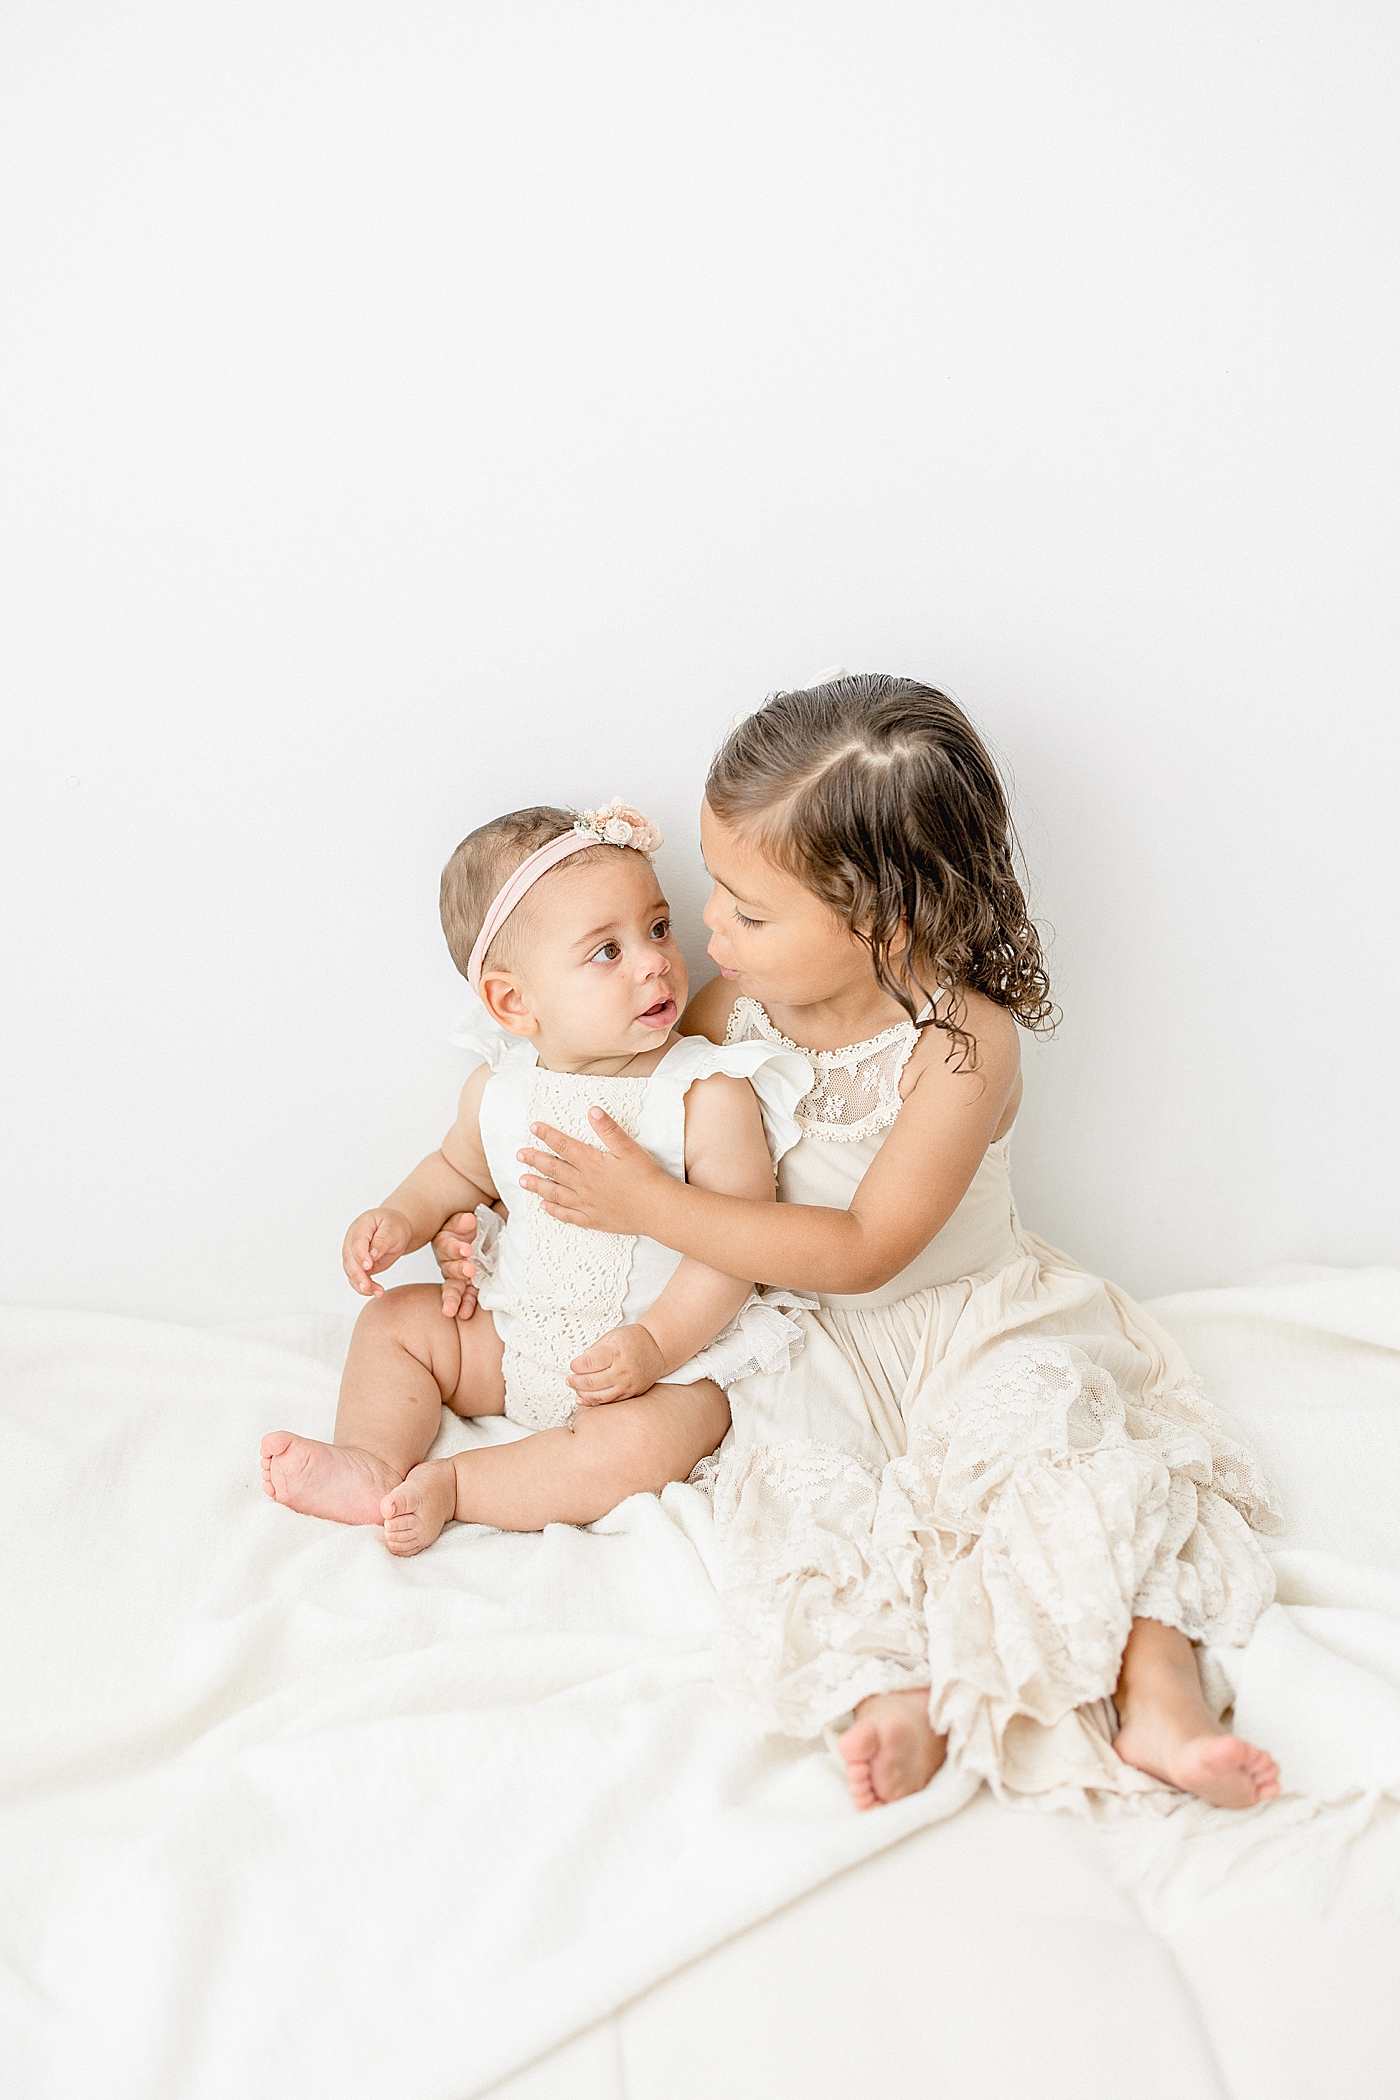 Sisters looking at each other. Photo by Brittany Elise Photography.